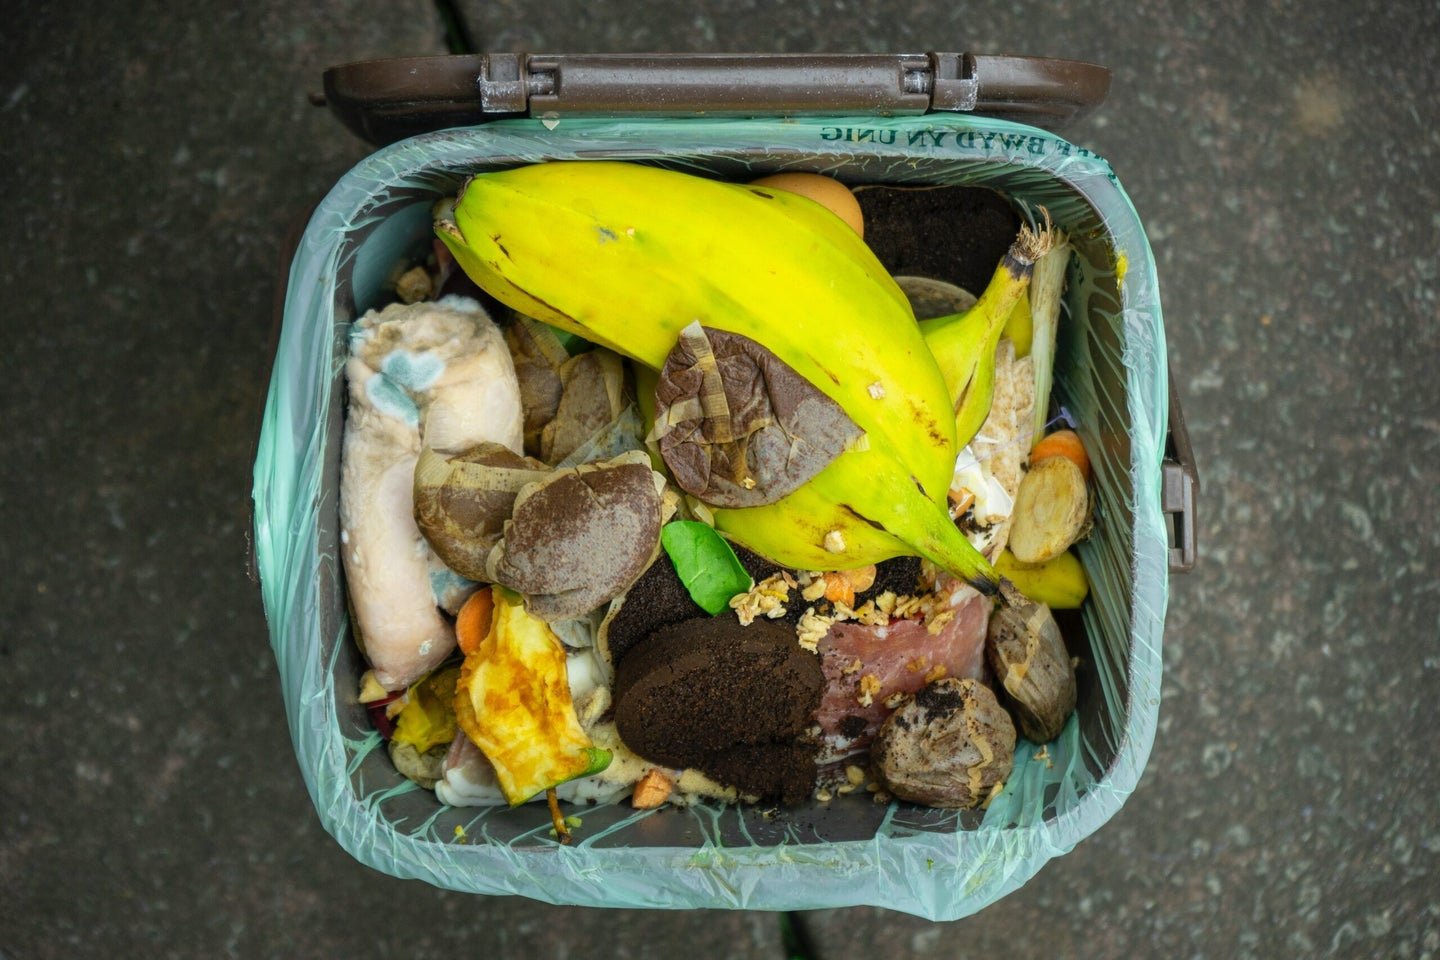 Banana and other food waste in bin.